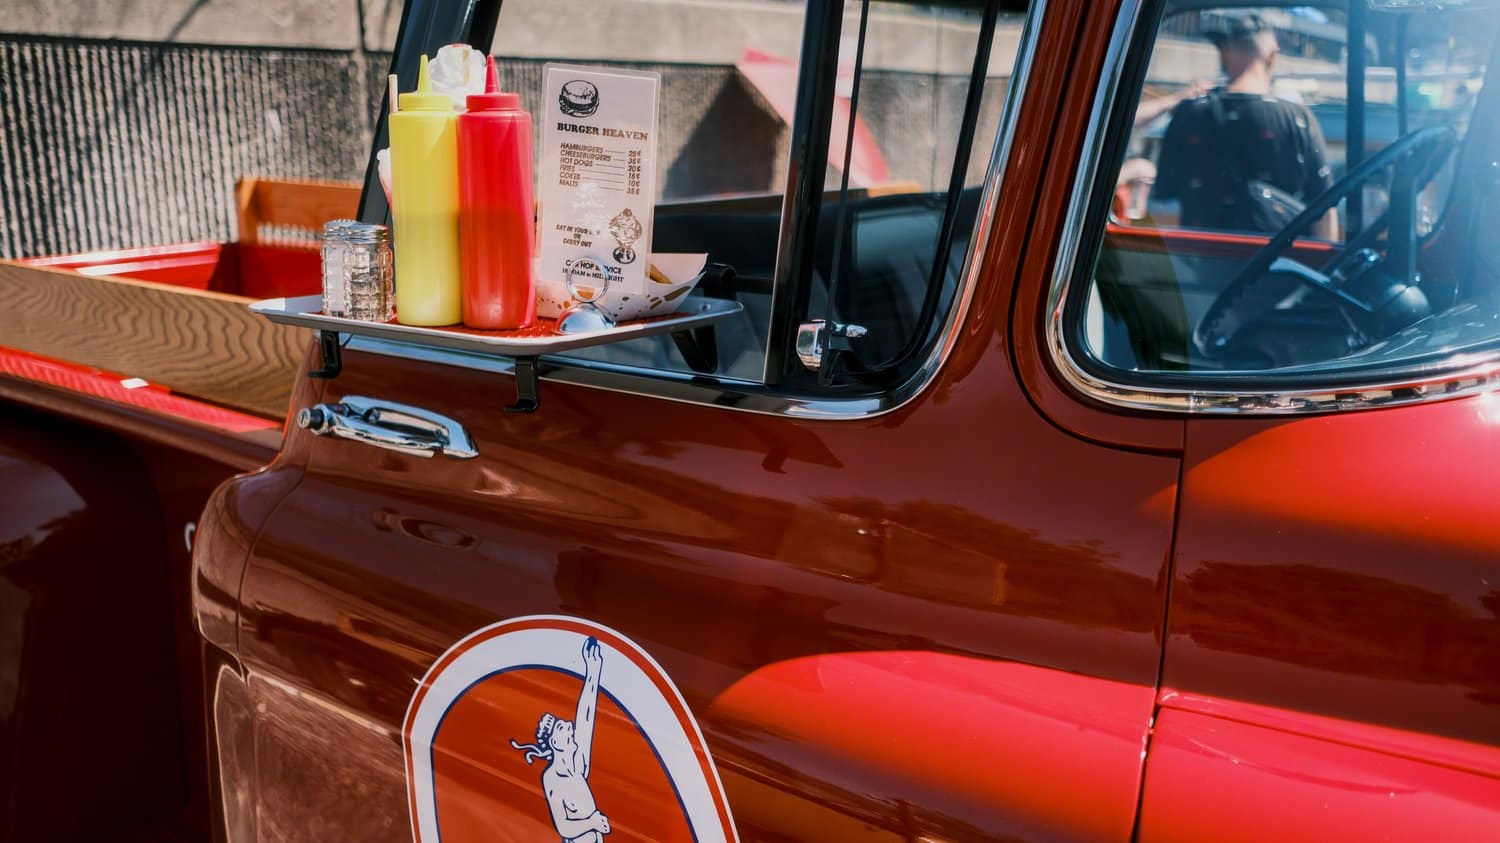 Vintage red pickup truck with car hop tray.